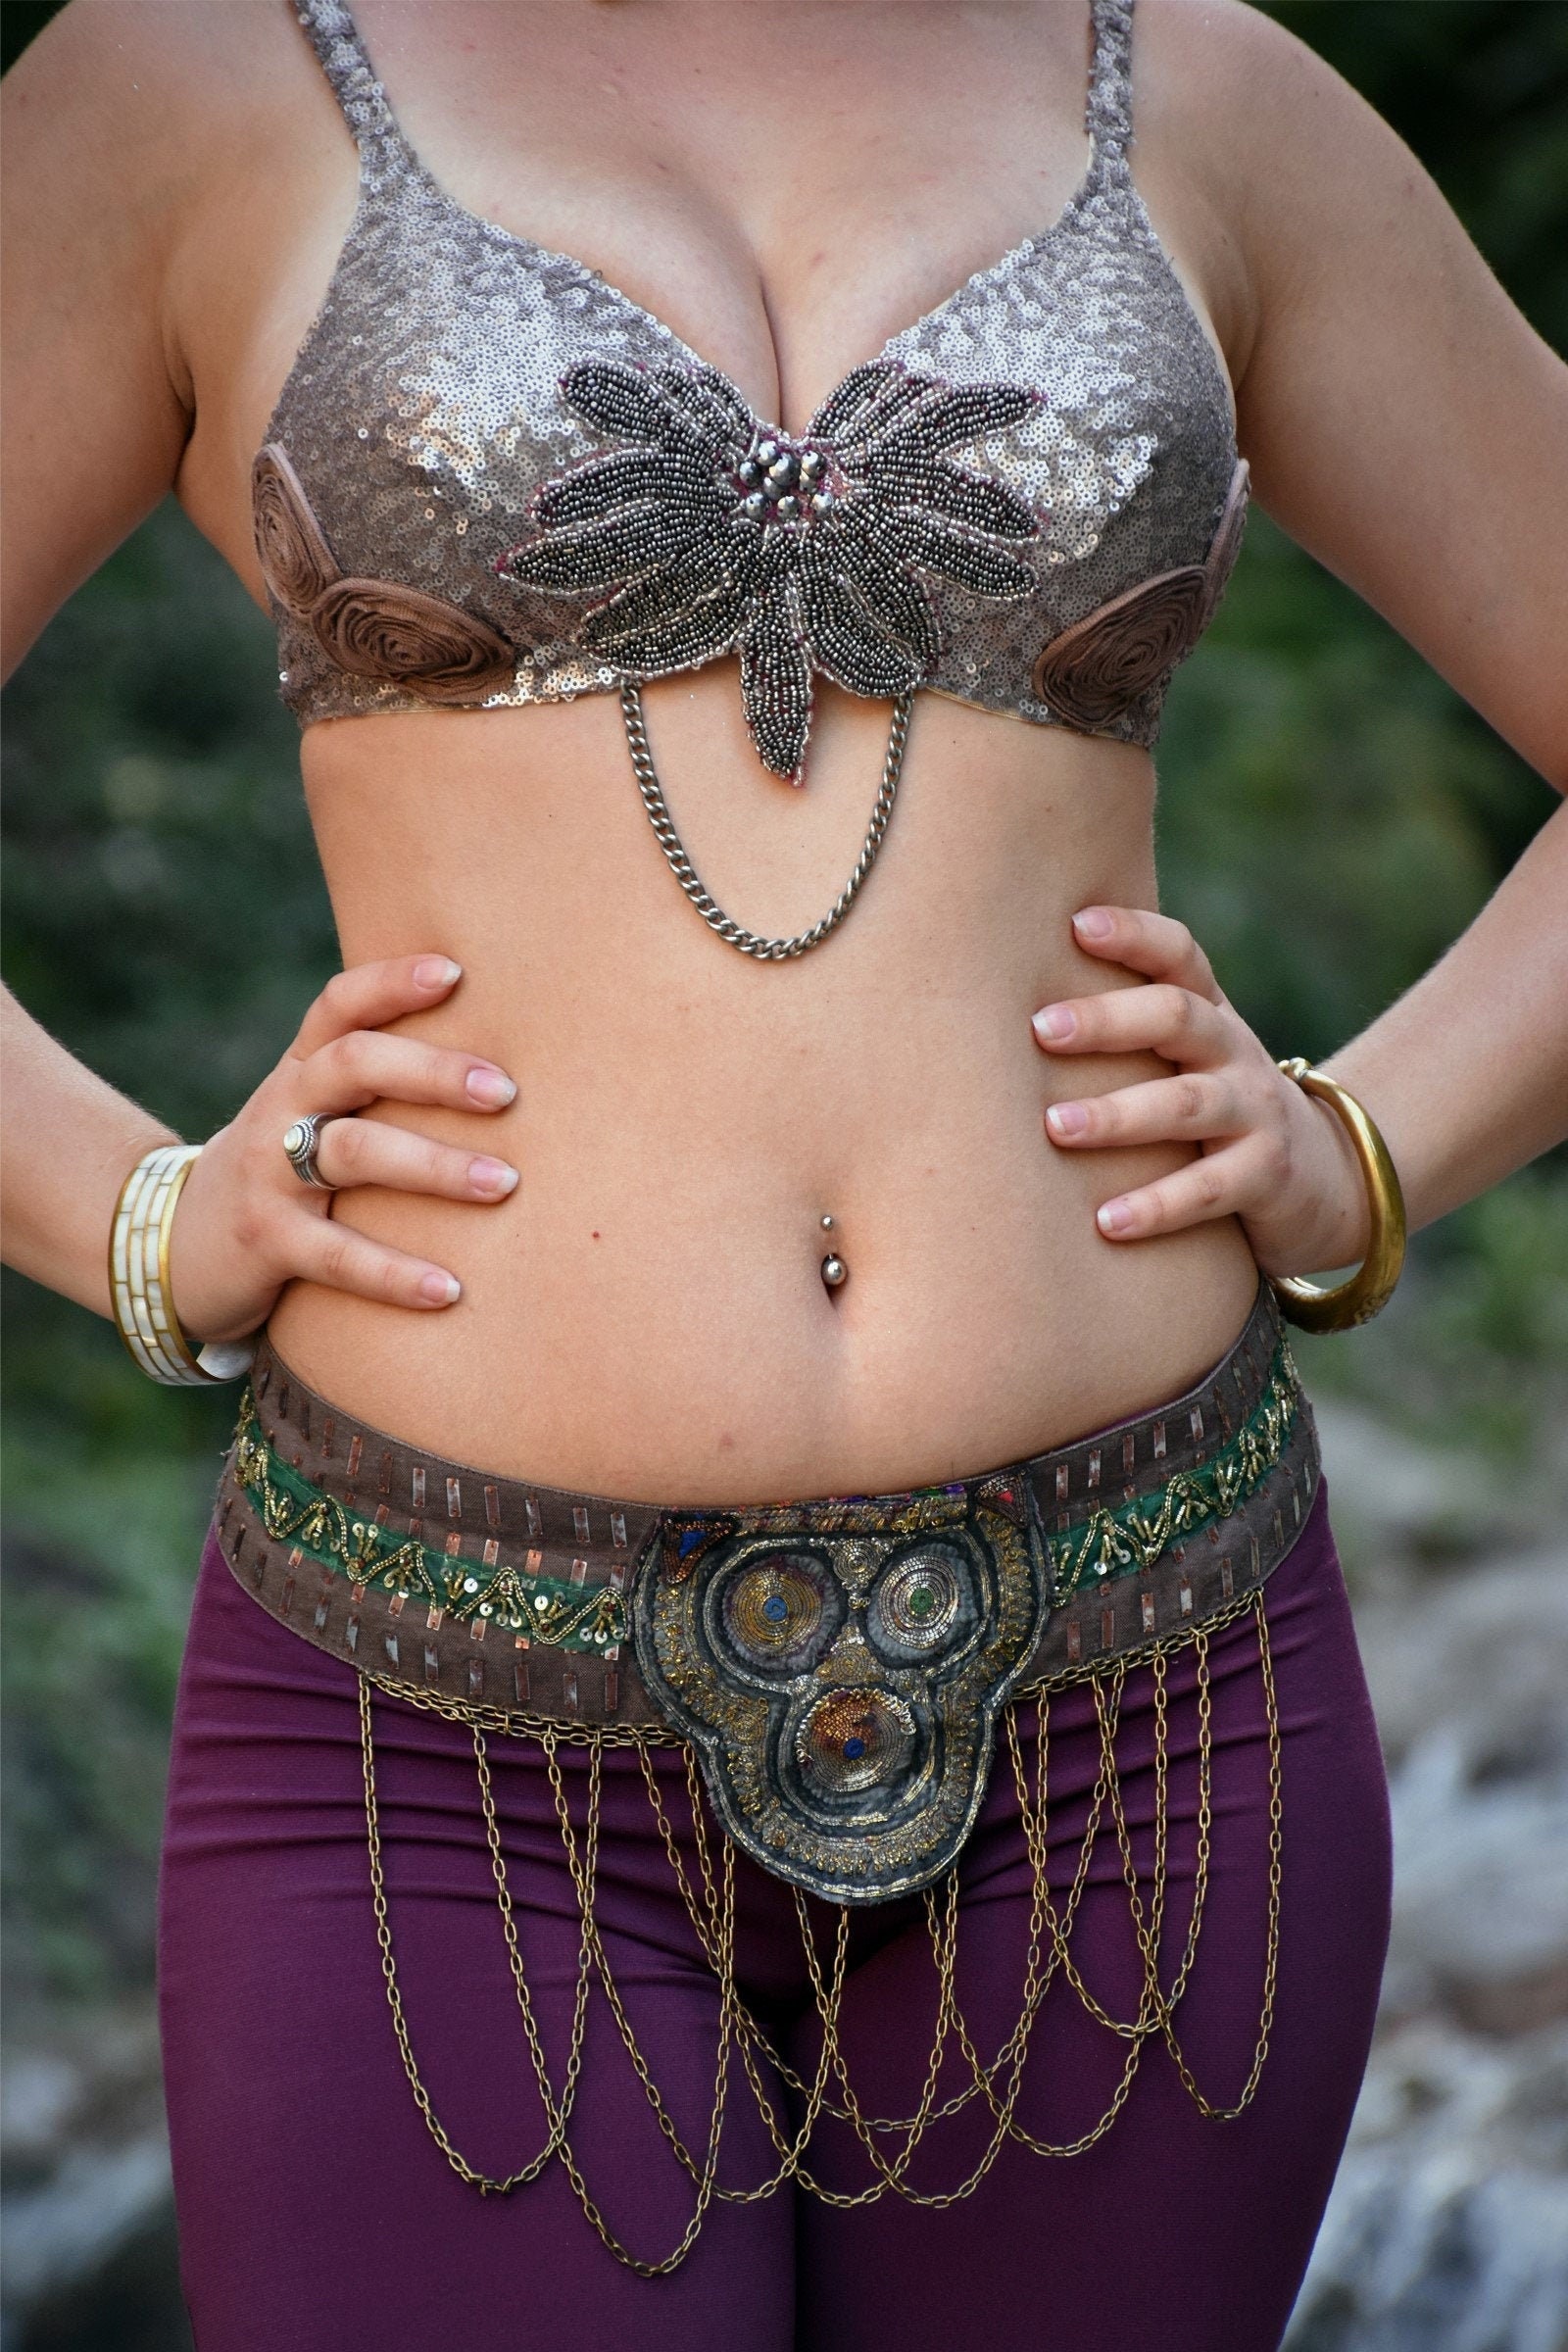 Stunning custom Belly dance bra with vintage Assuit and quality